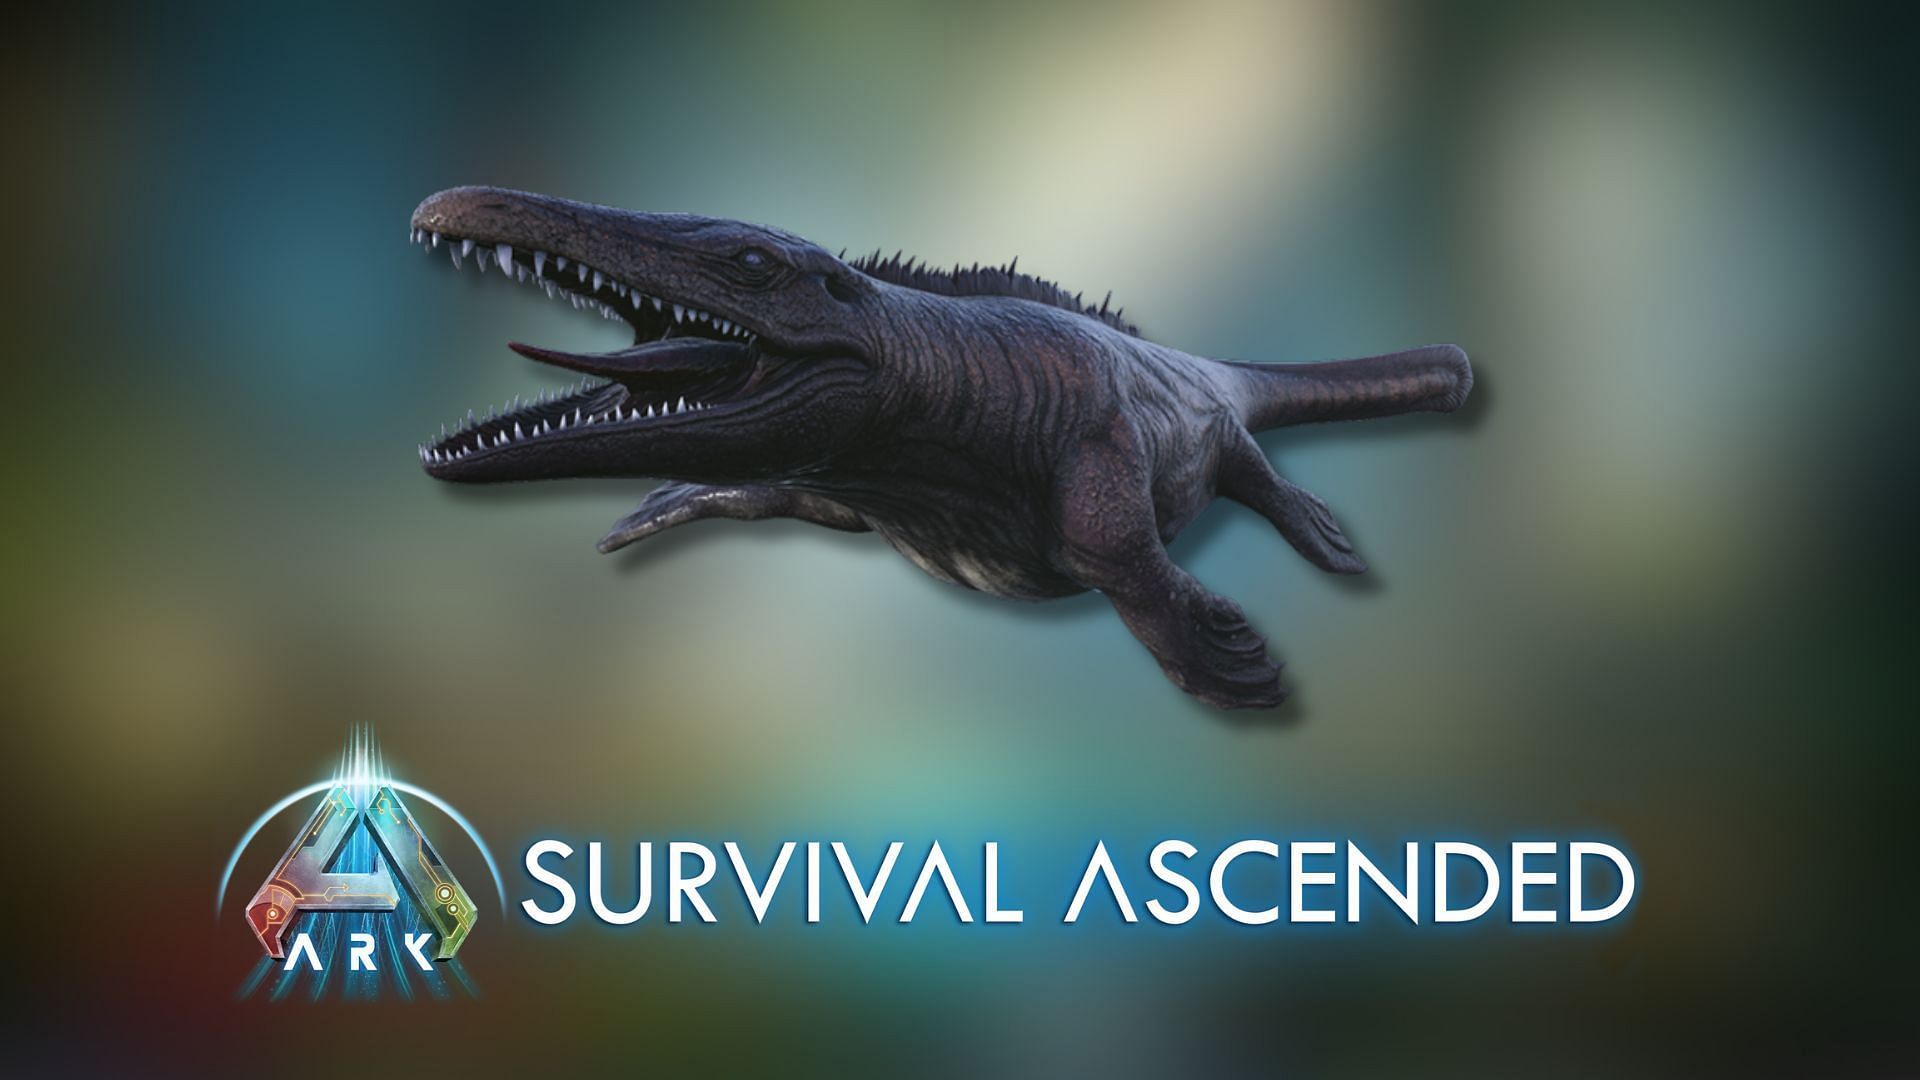 Players can get Black Pearls in Ark Survival Ascended by killing Alpha Mausaurus (Image via Studio Wildcard)